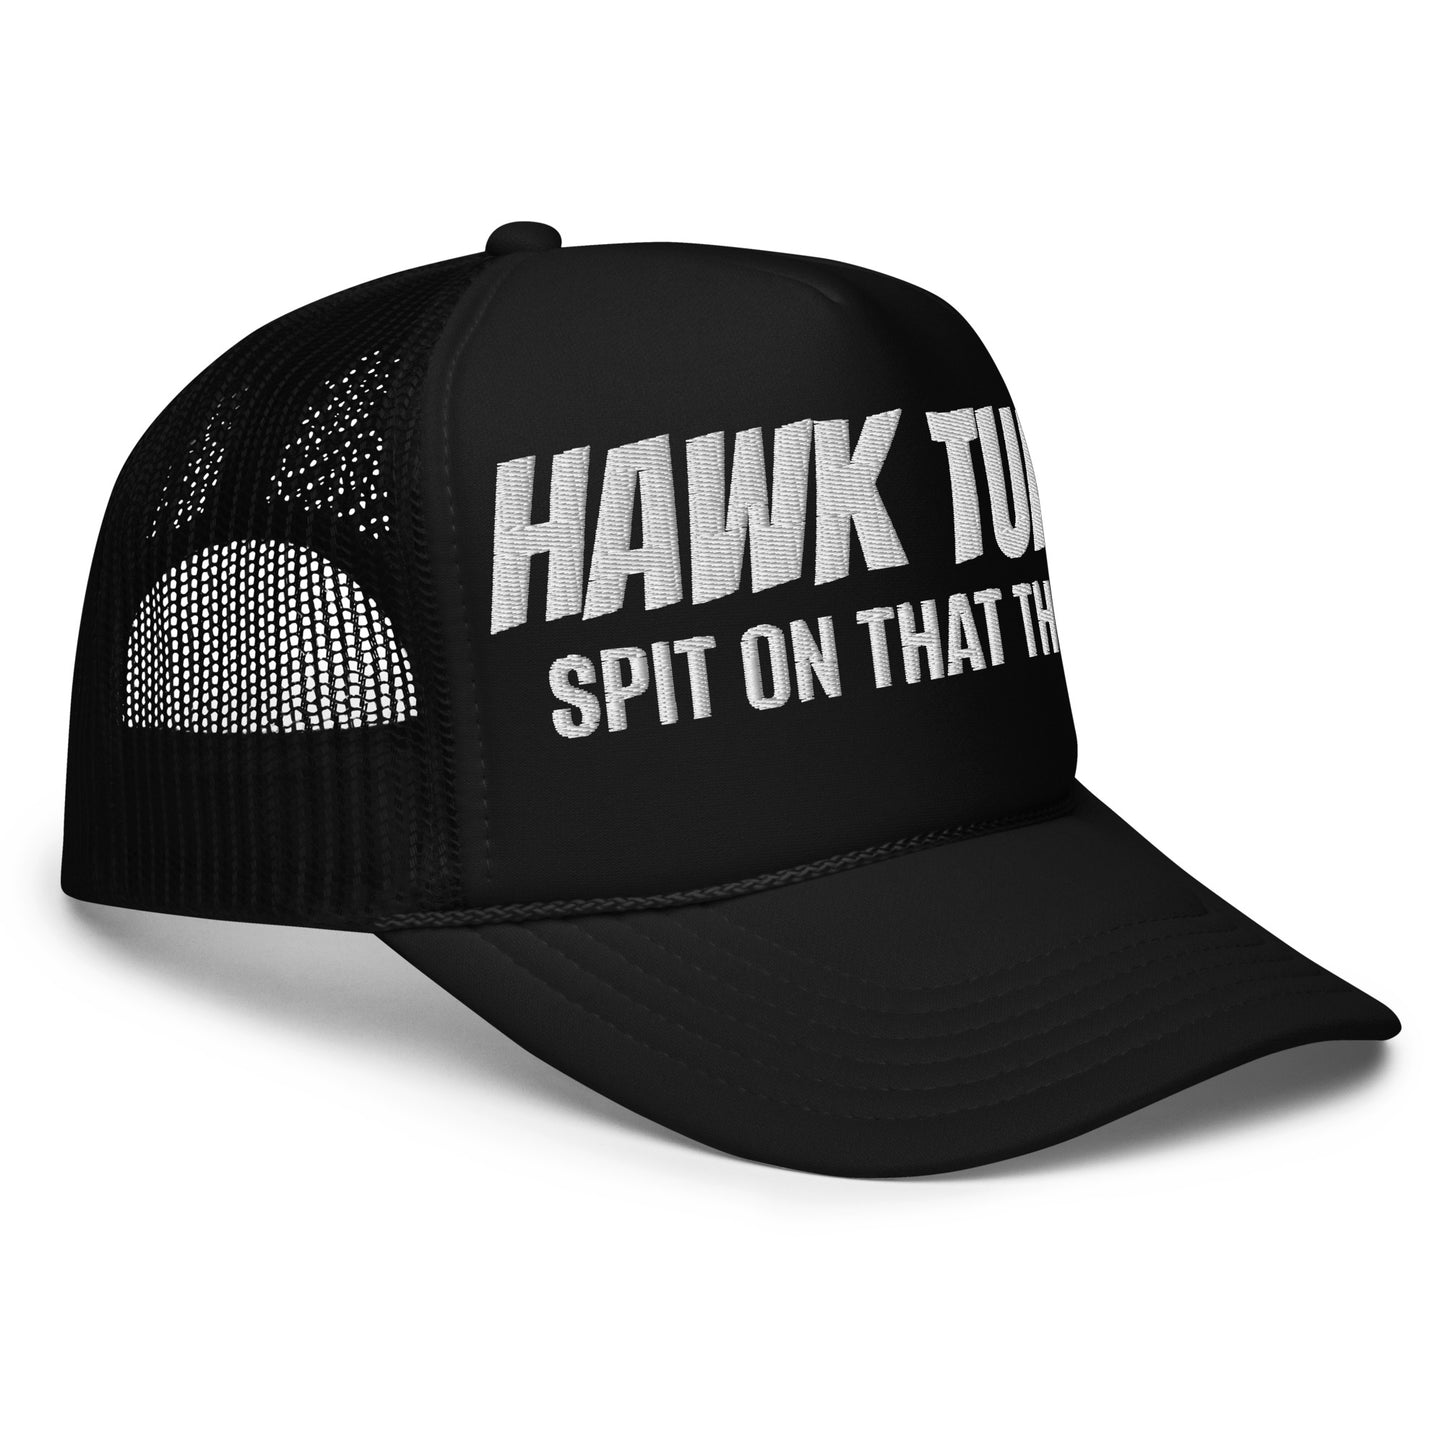 Hawk Tuah Solid Color Unisex Embroidered Foam Trucker Hat